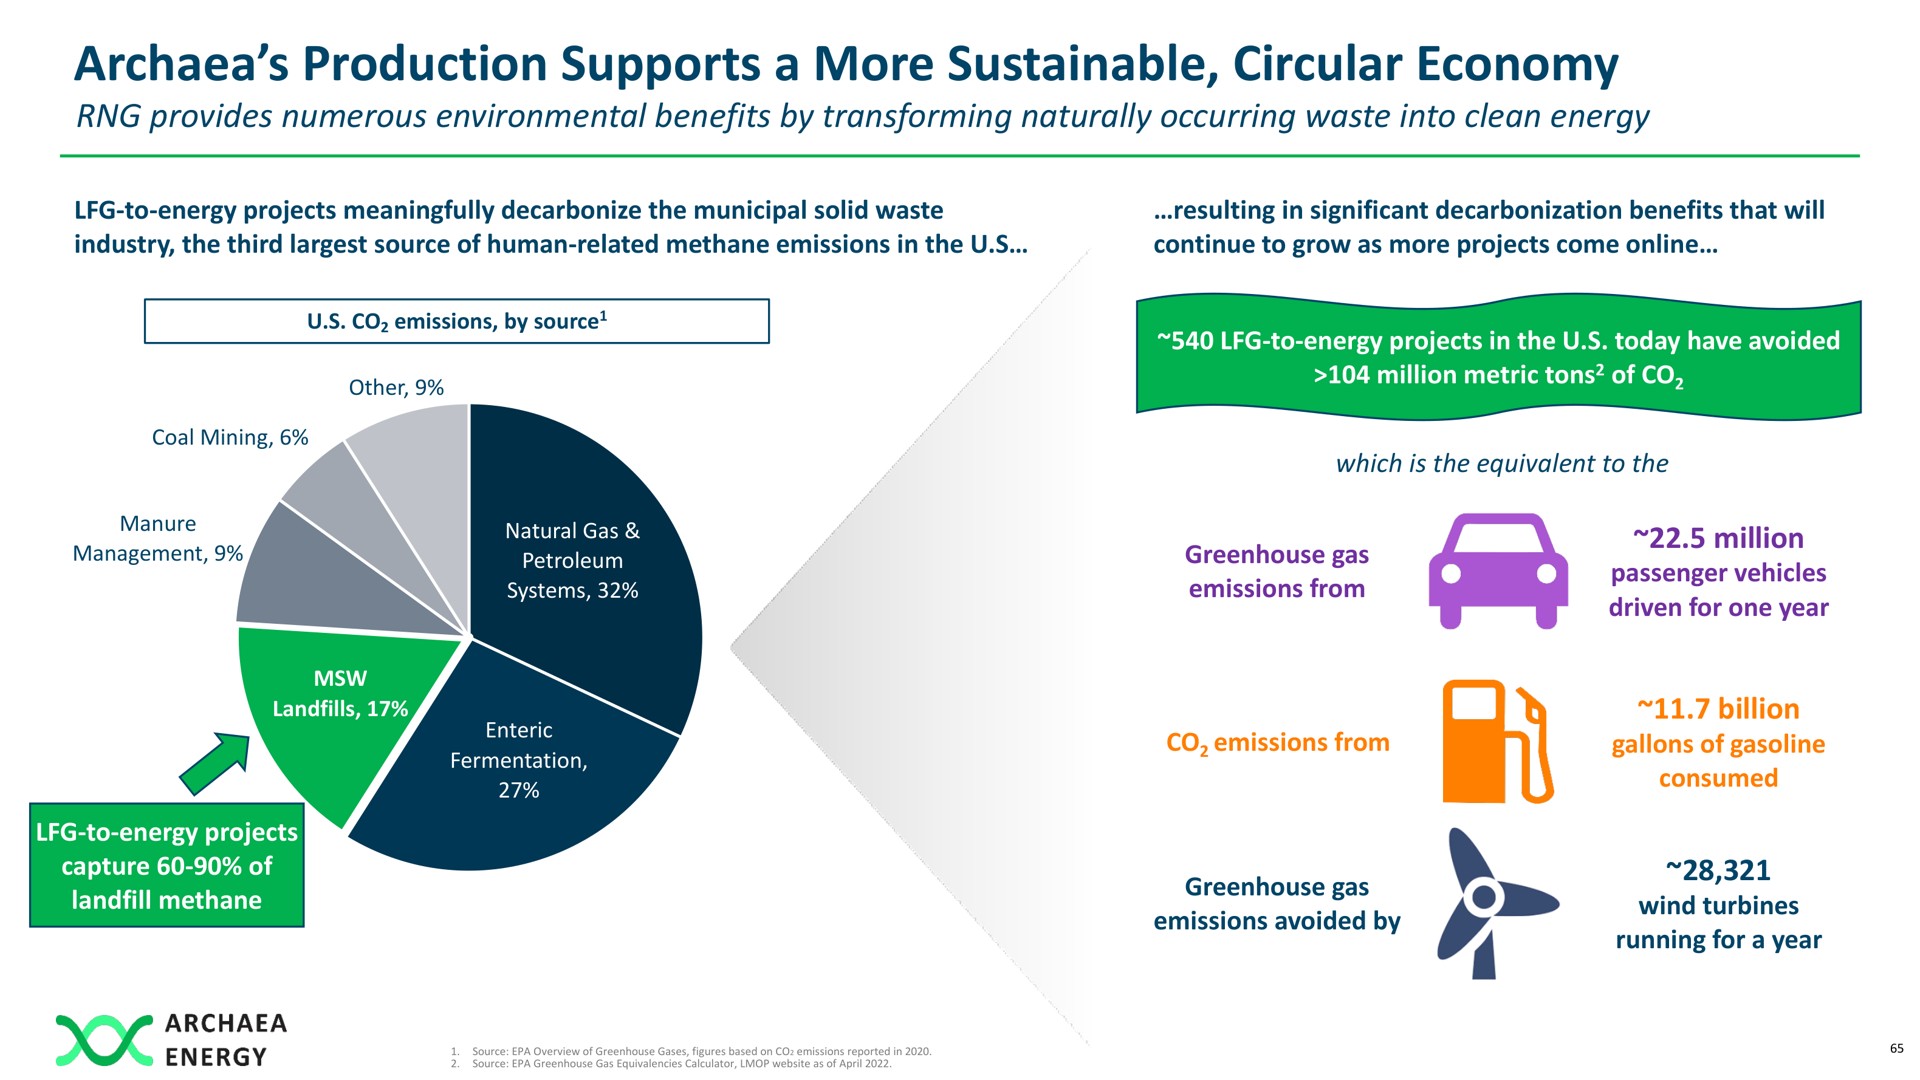 production supports a more sustainable circular economy | Archaea Energy